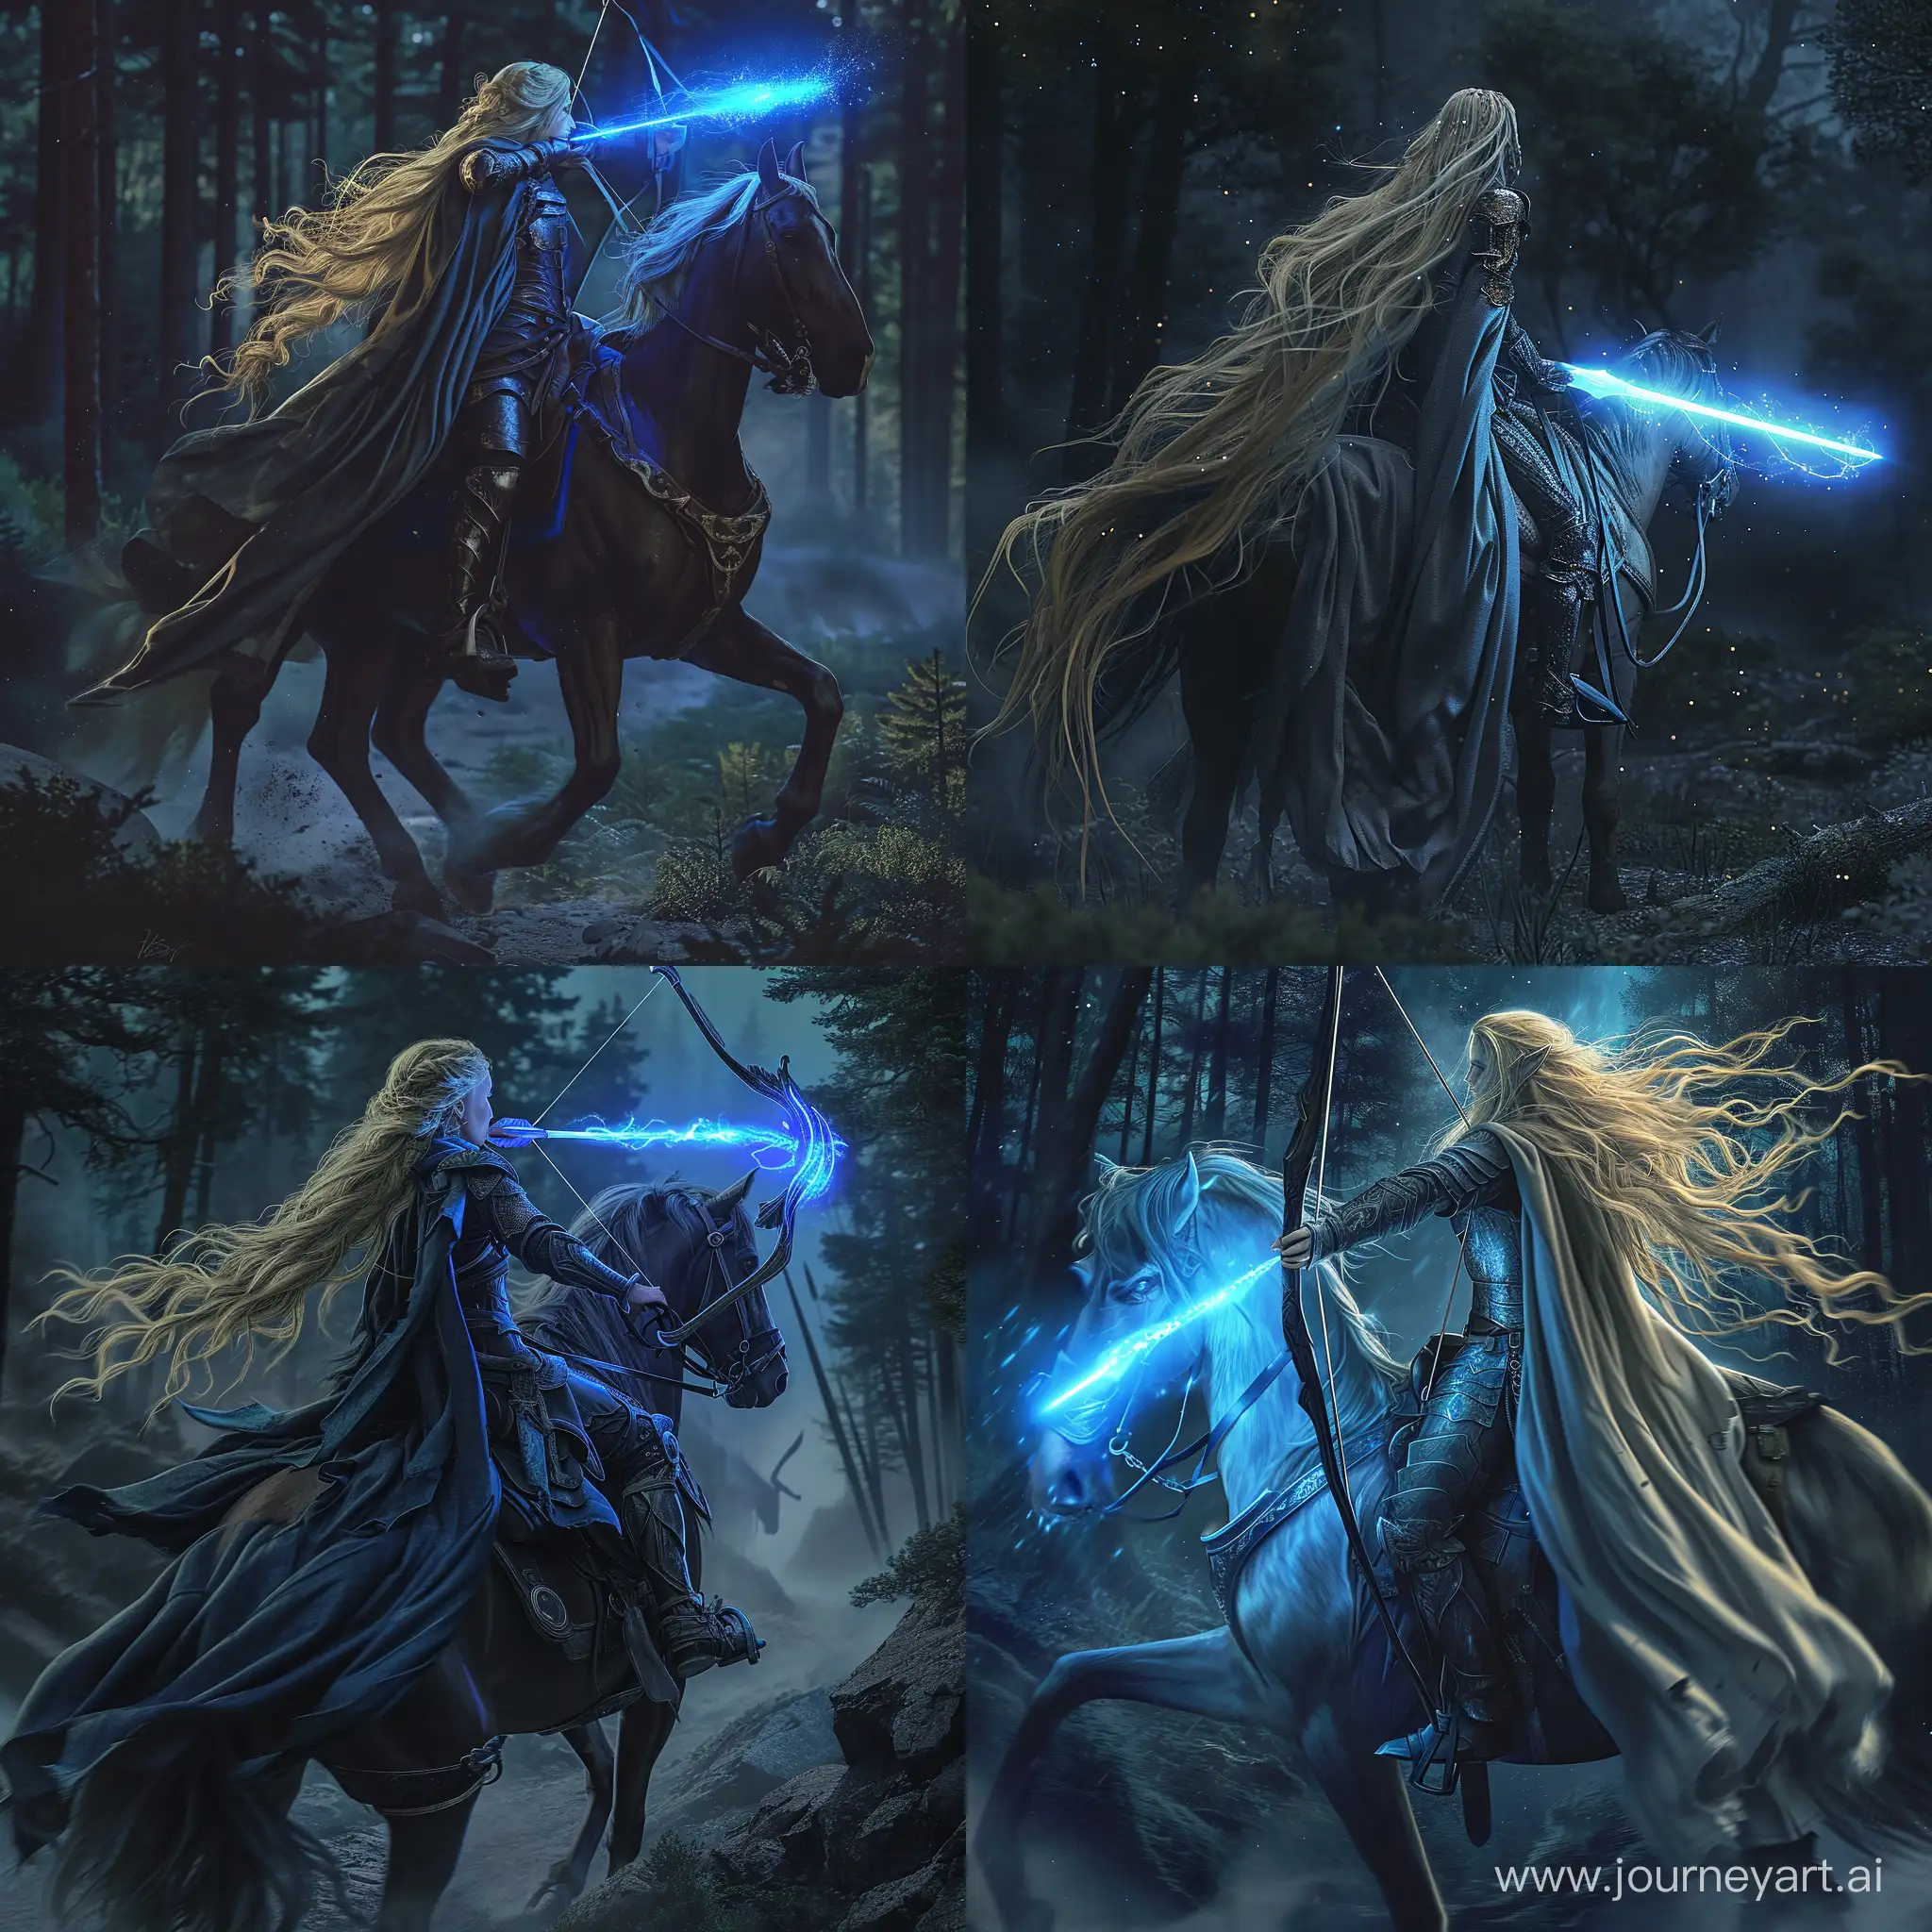 Night-Forest-Warrior-Princess-Riding-Horse-with-Glowing-Blue-Bow